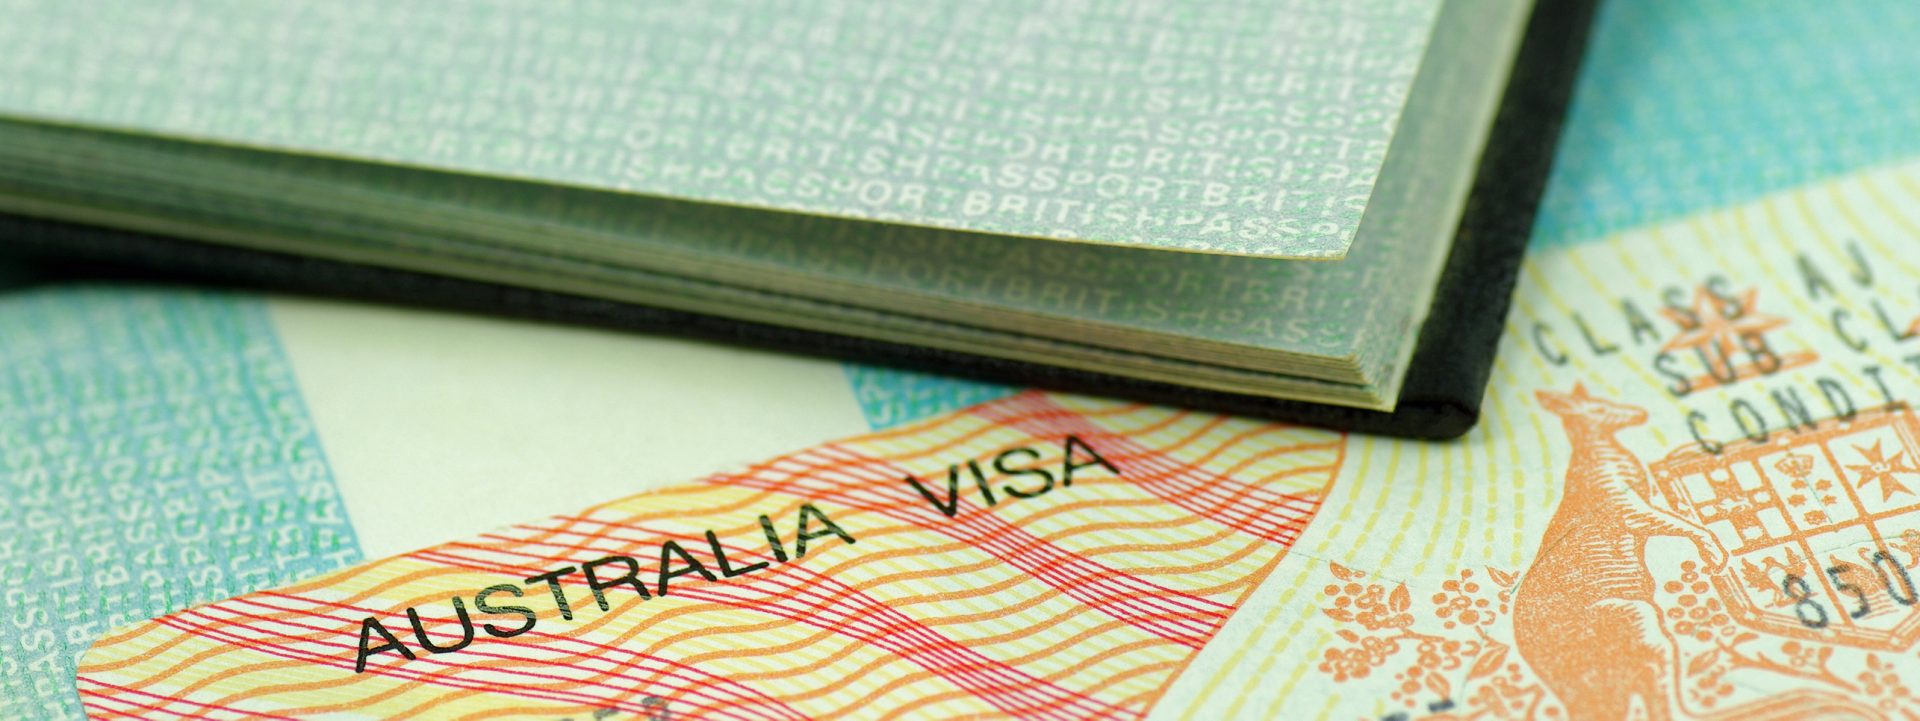 How to avoid Cancellation of your Australian Visa